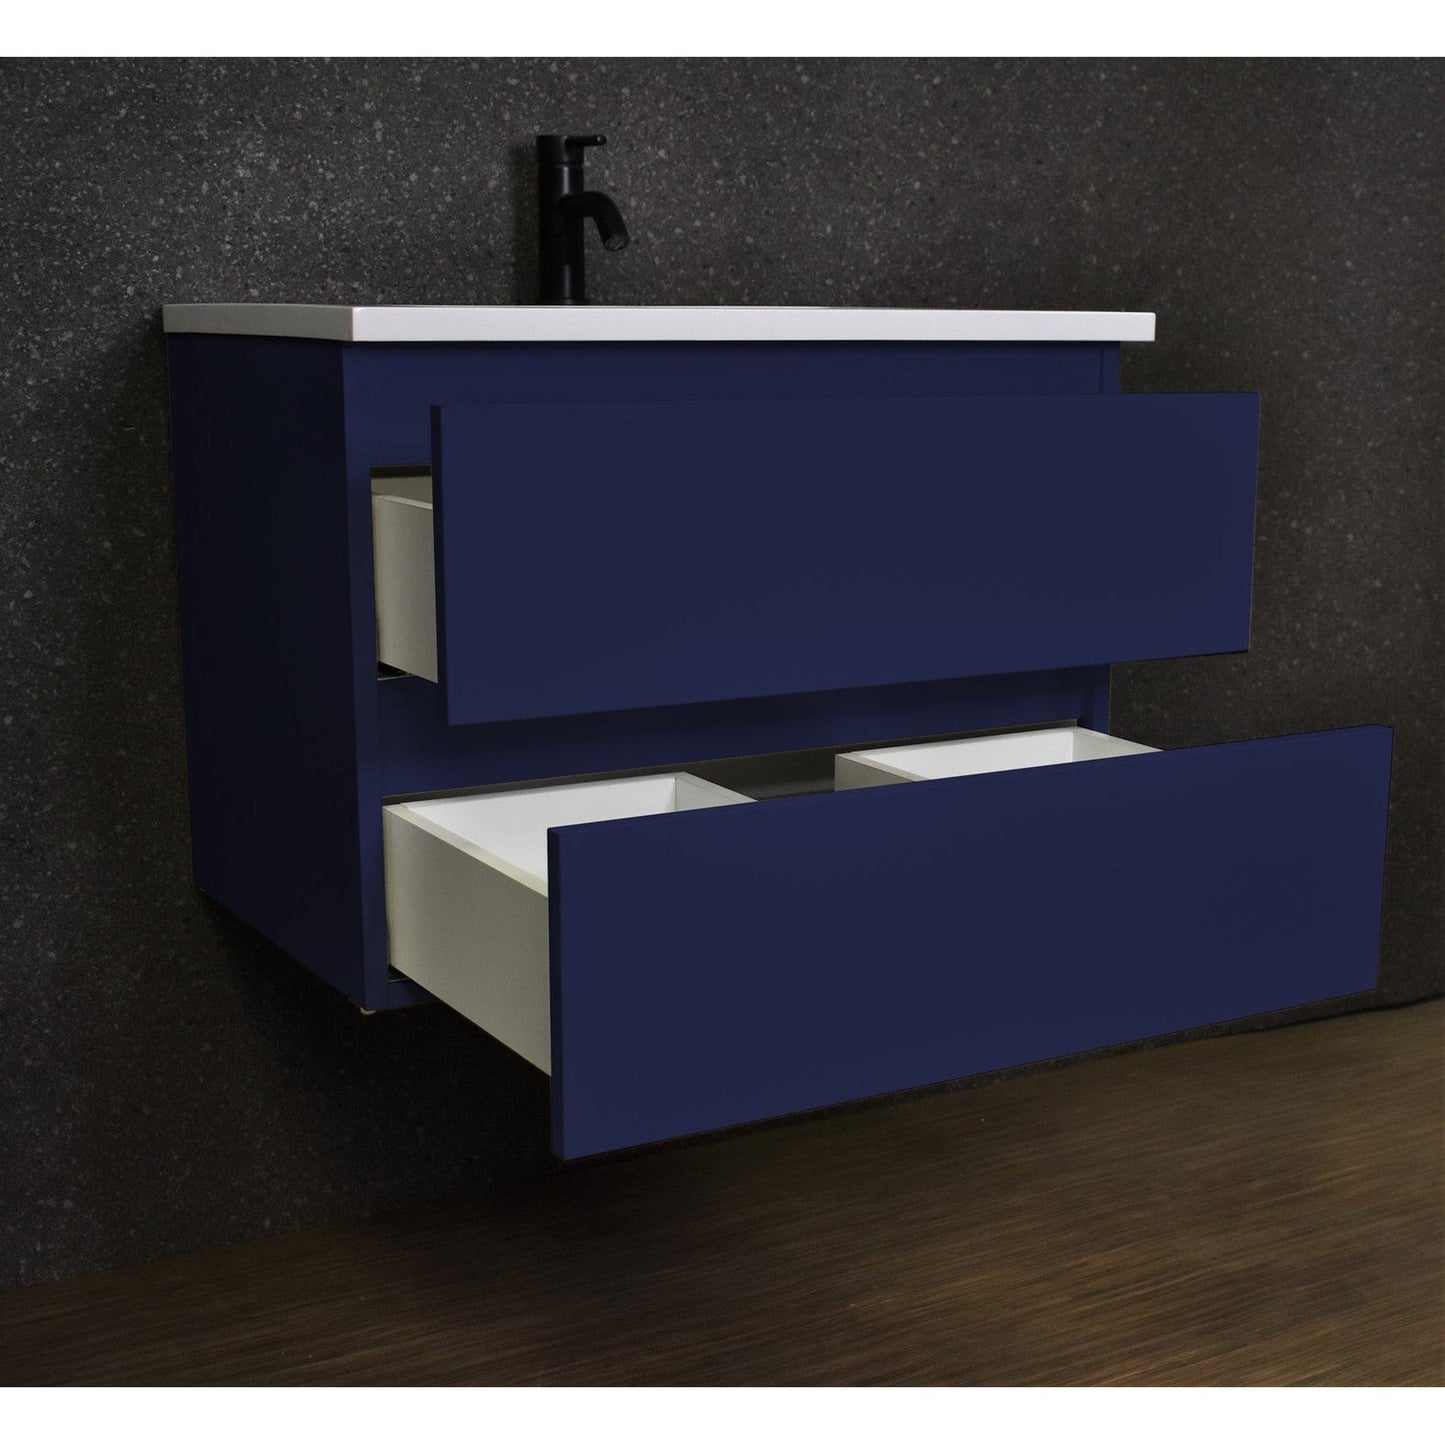 Volpa USA Salt 30" x 20" Navy Wall-Mounted Floating Bathroom Vanity With Drawers, Acrylic Top and Integrated Acrylic Sink